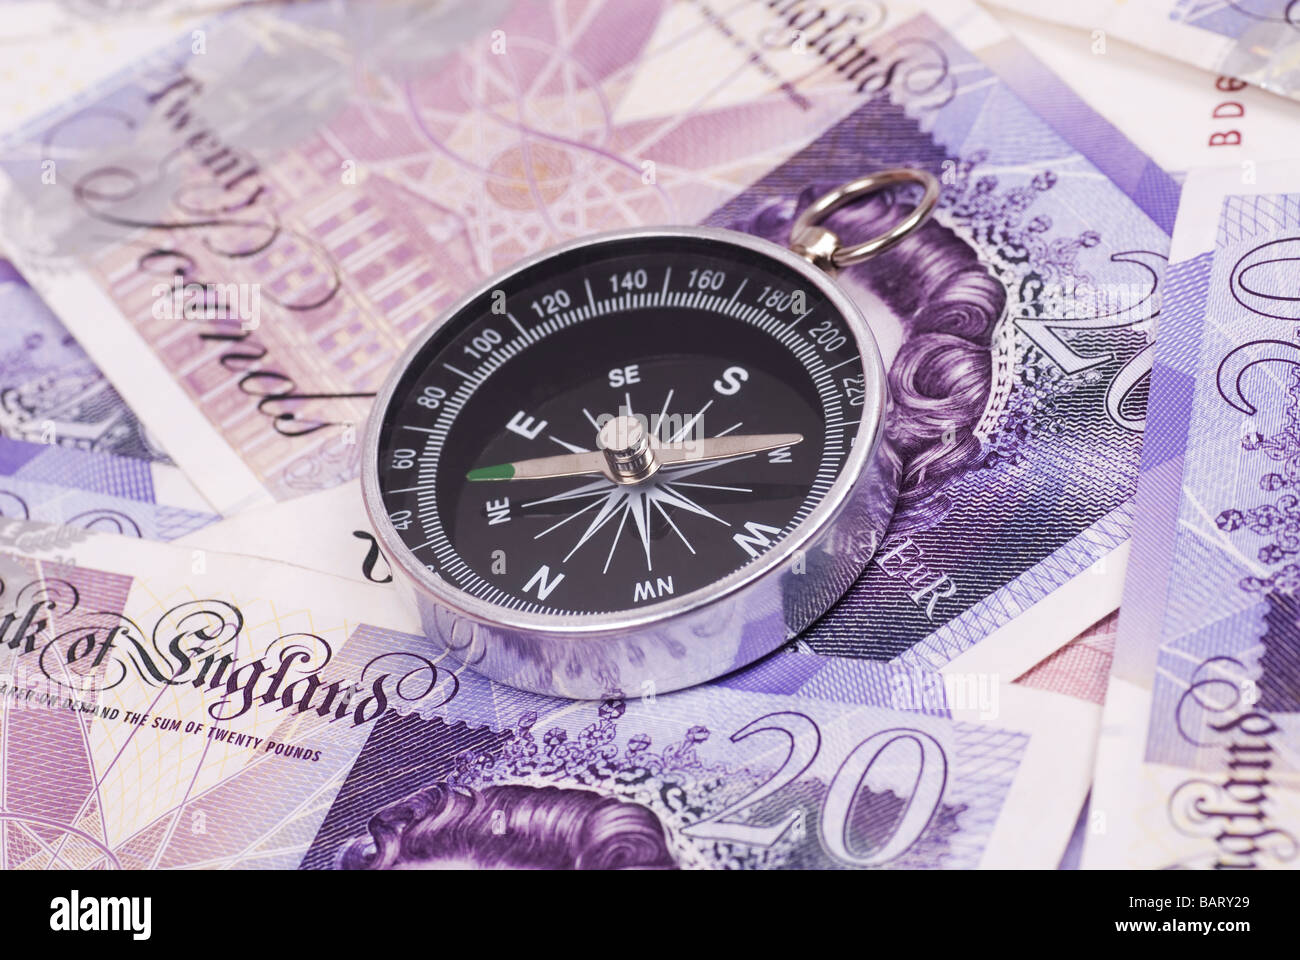 Compass over a pile of British money Stock Photo